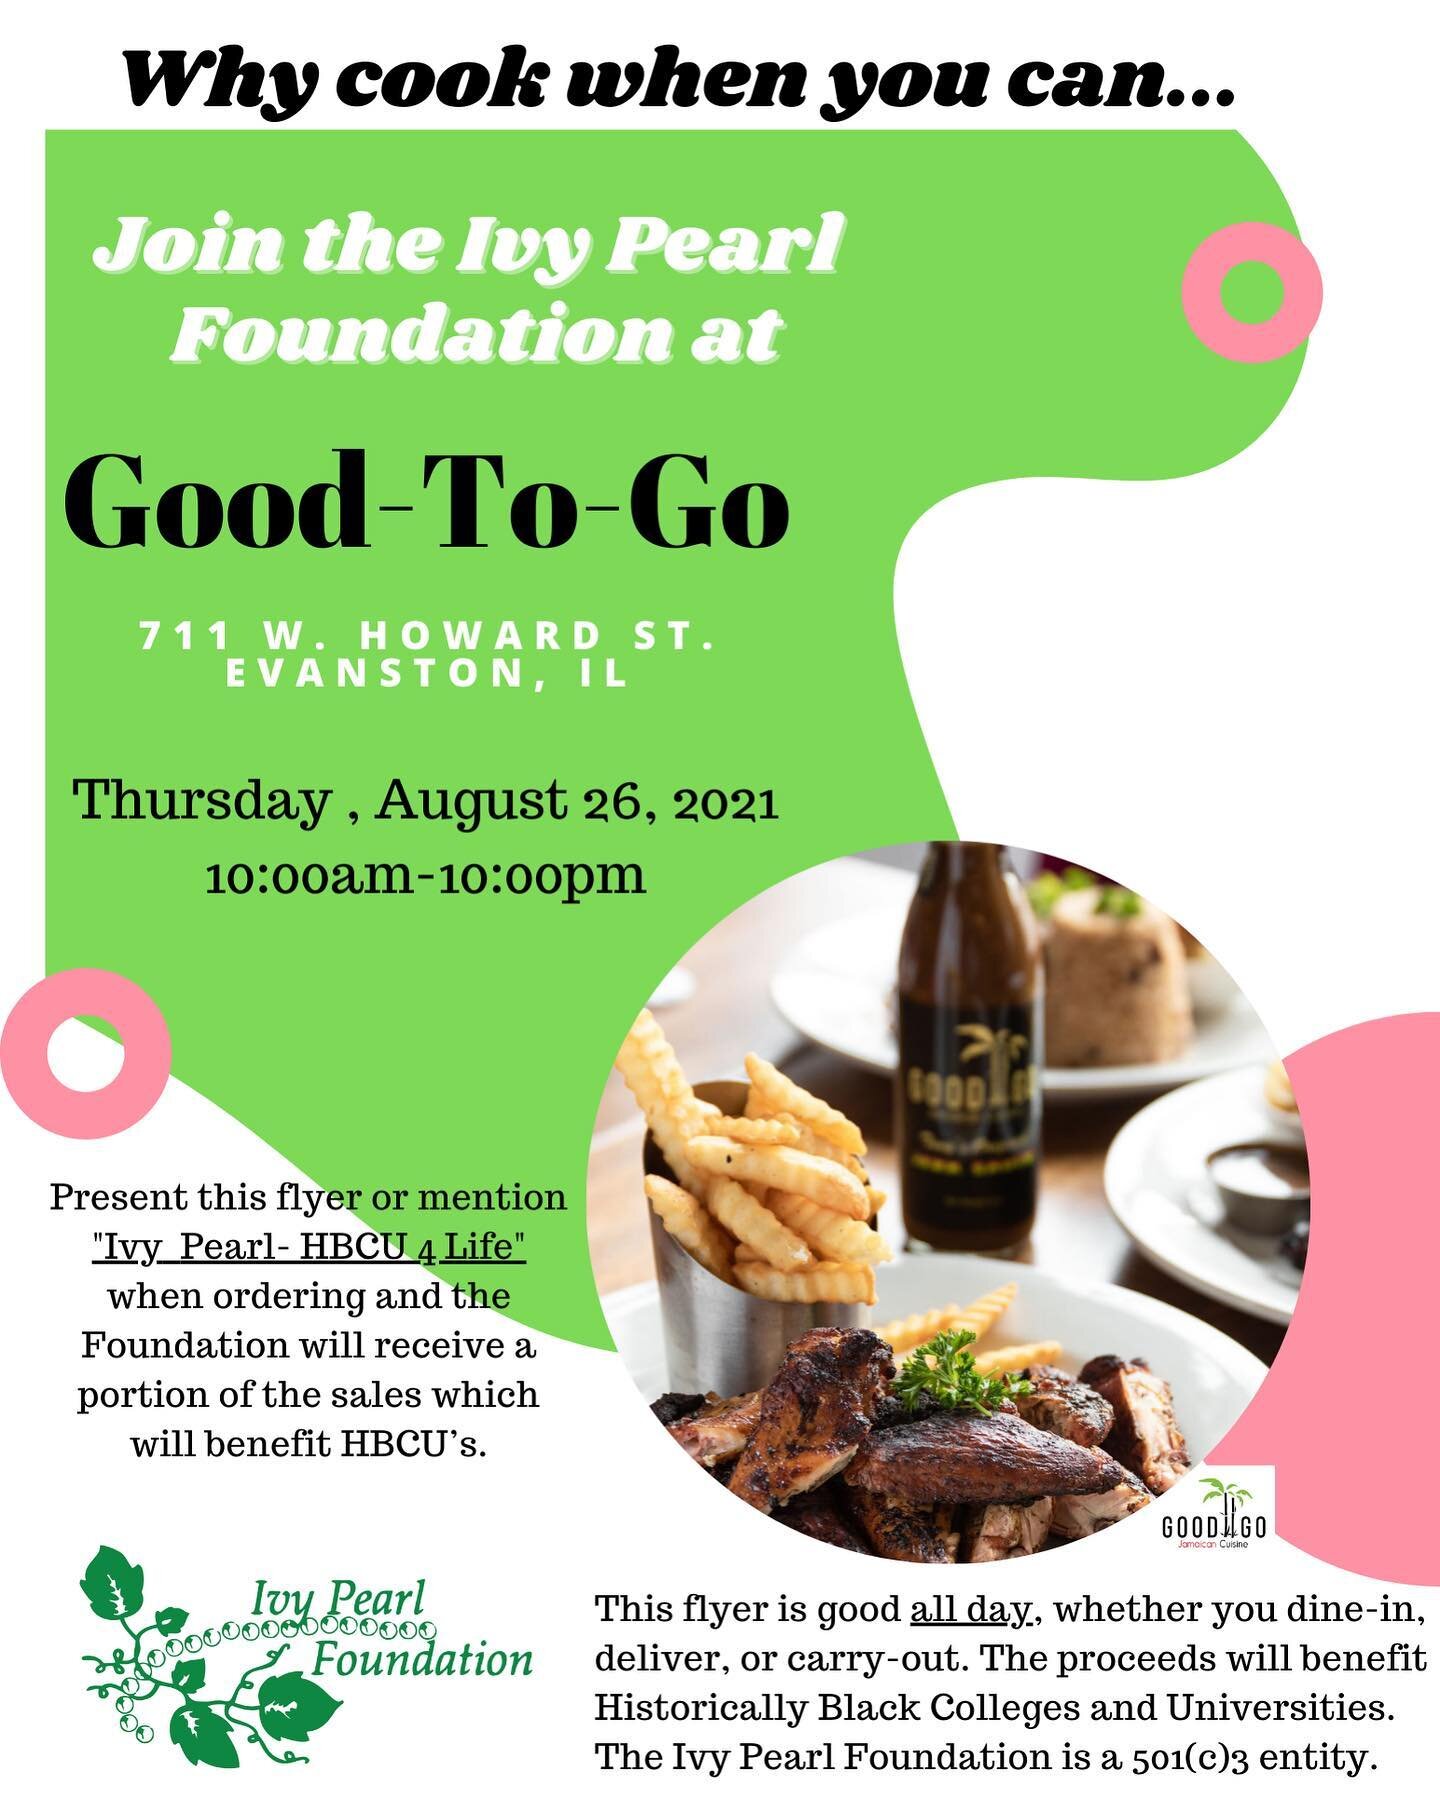 Join us as we support the Ivy Pearl Foundation&rsquo;s fundraiser on August 26th with some great food for an even better cause!